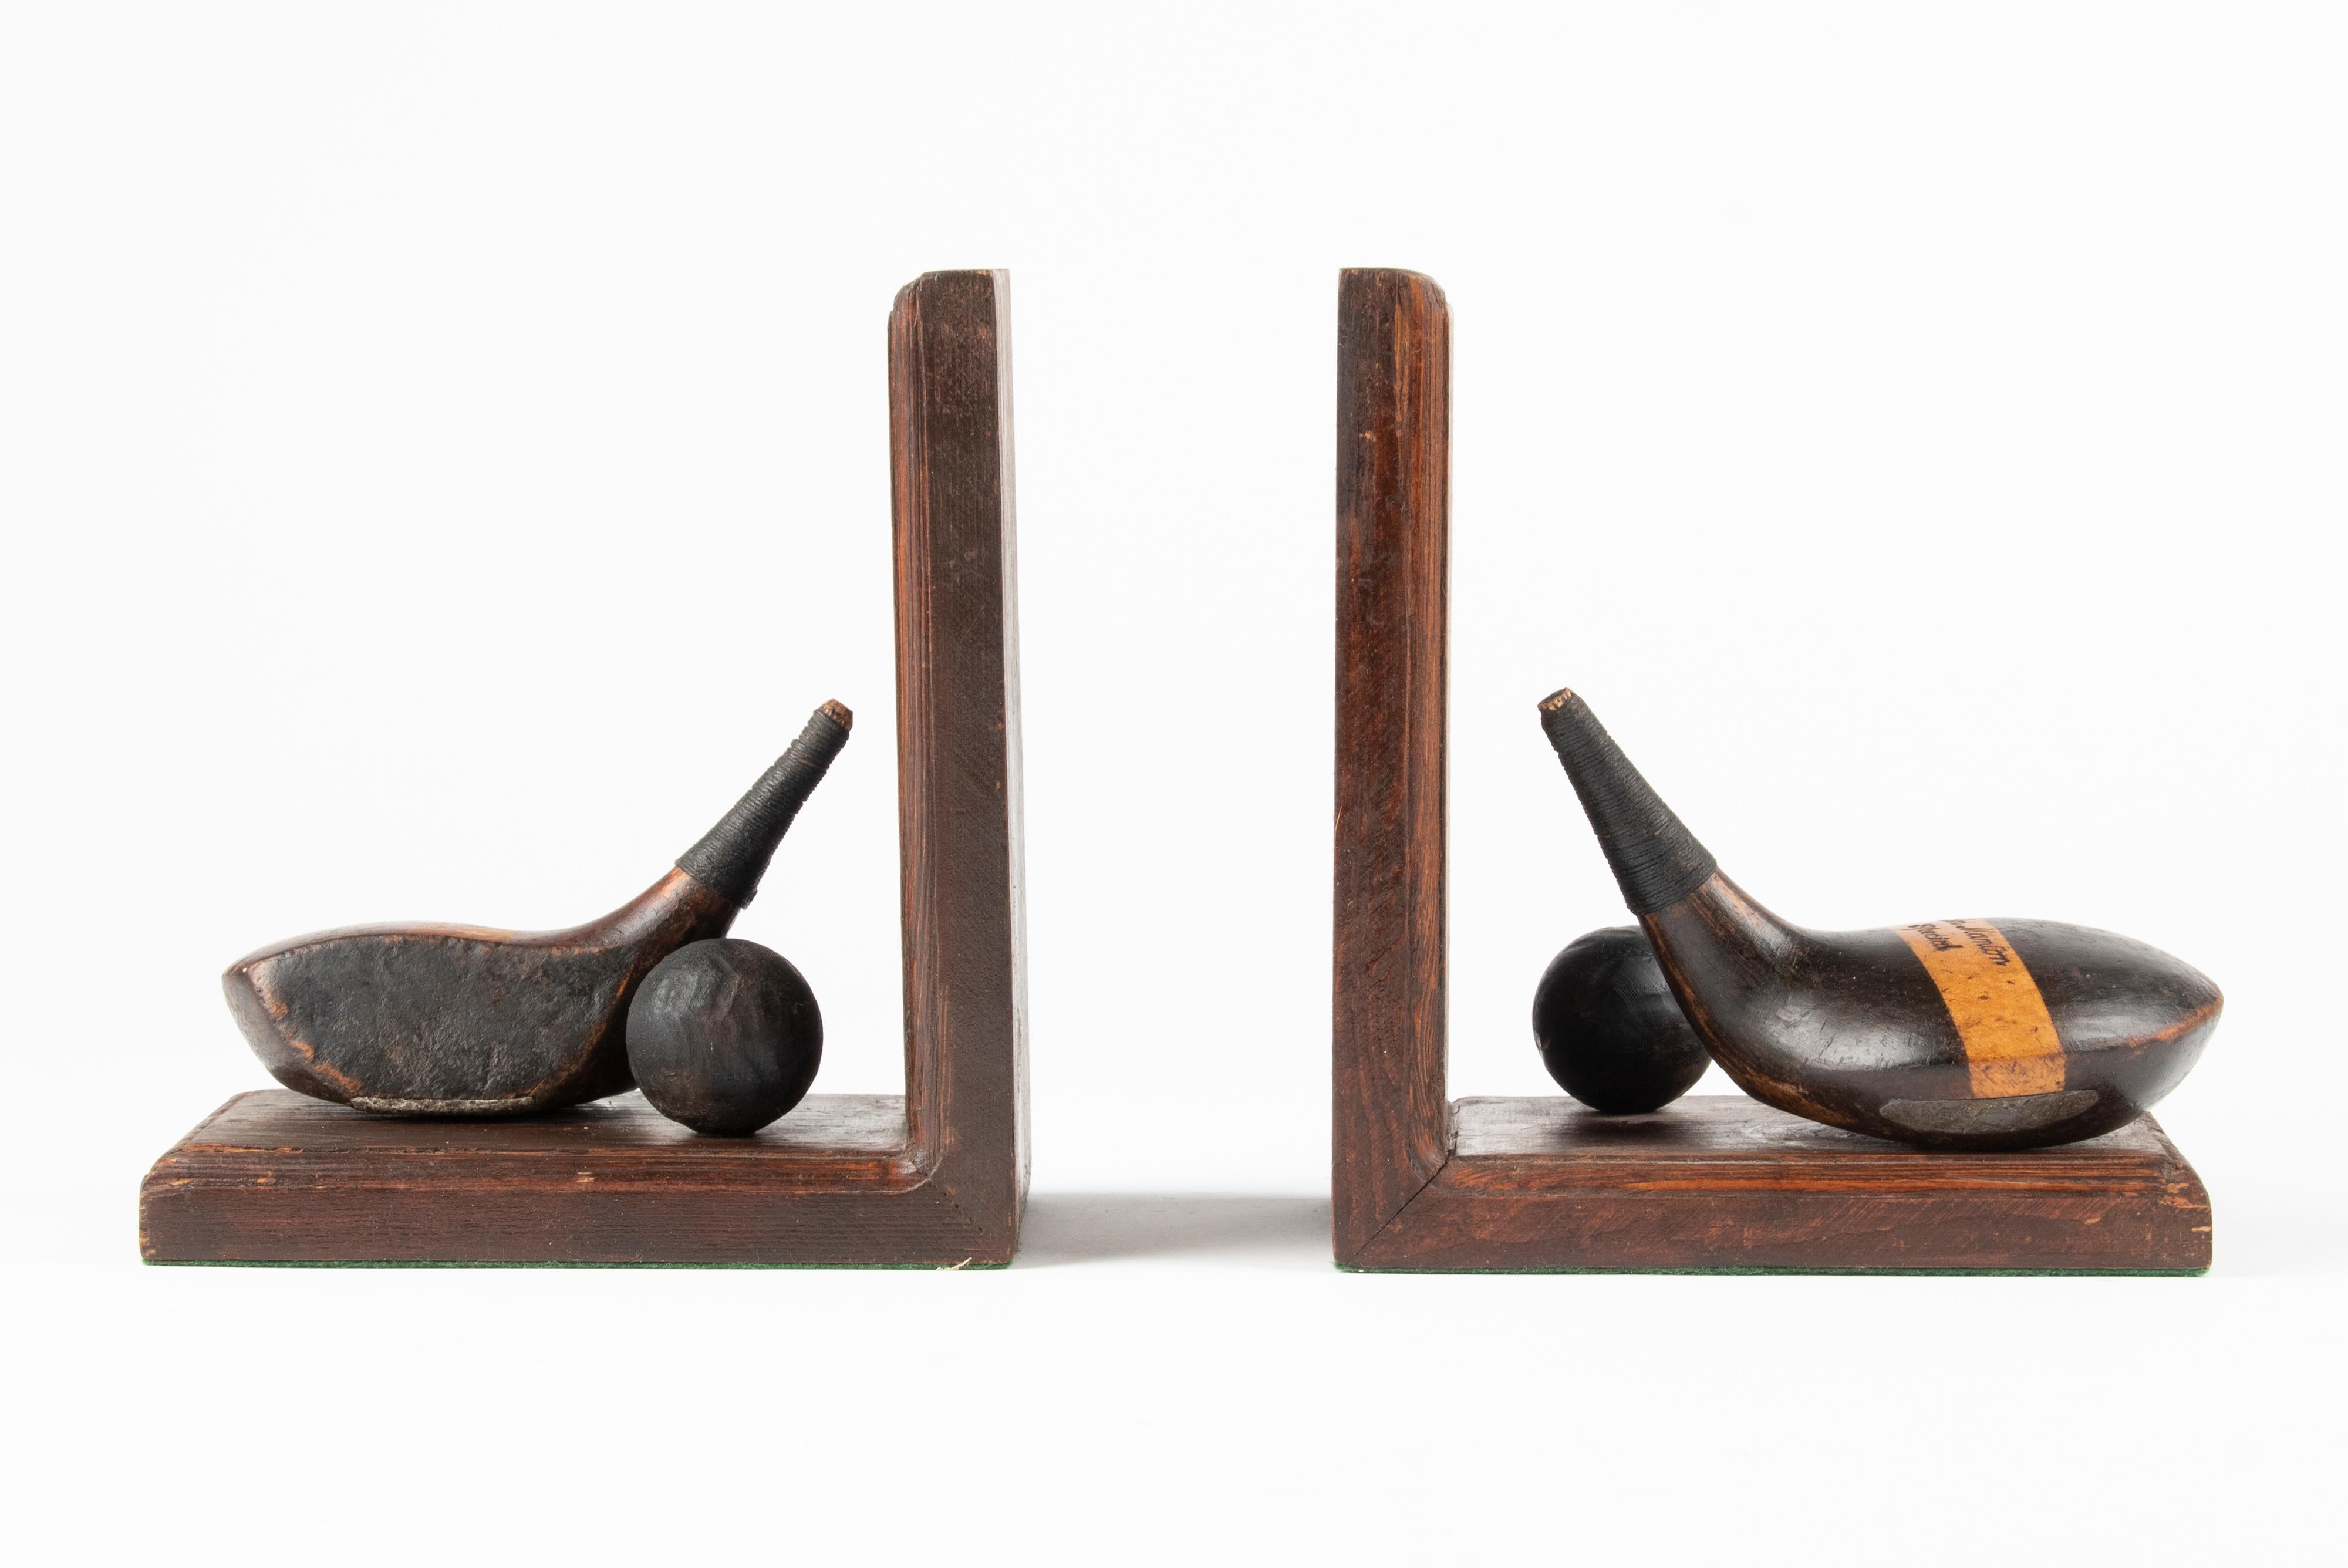 A pair of old / vintage bookends, made of pine wood, decorated with old golf clubs. One of the two supports is painted with the name of the famous Scottish golf course Saint Andrews. These bookends date from circa 1930, probably made as a